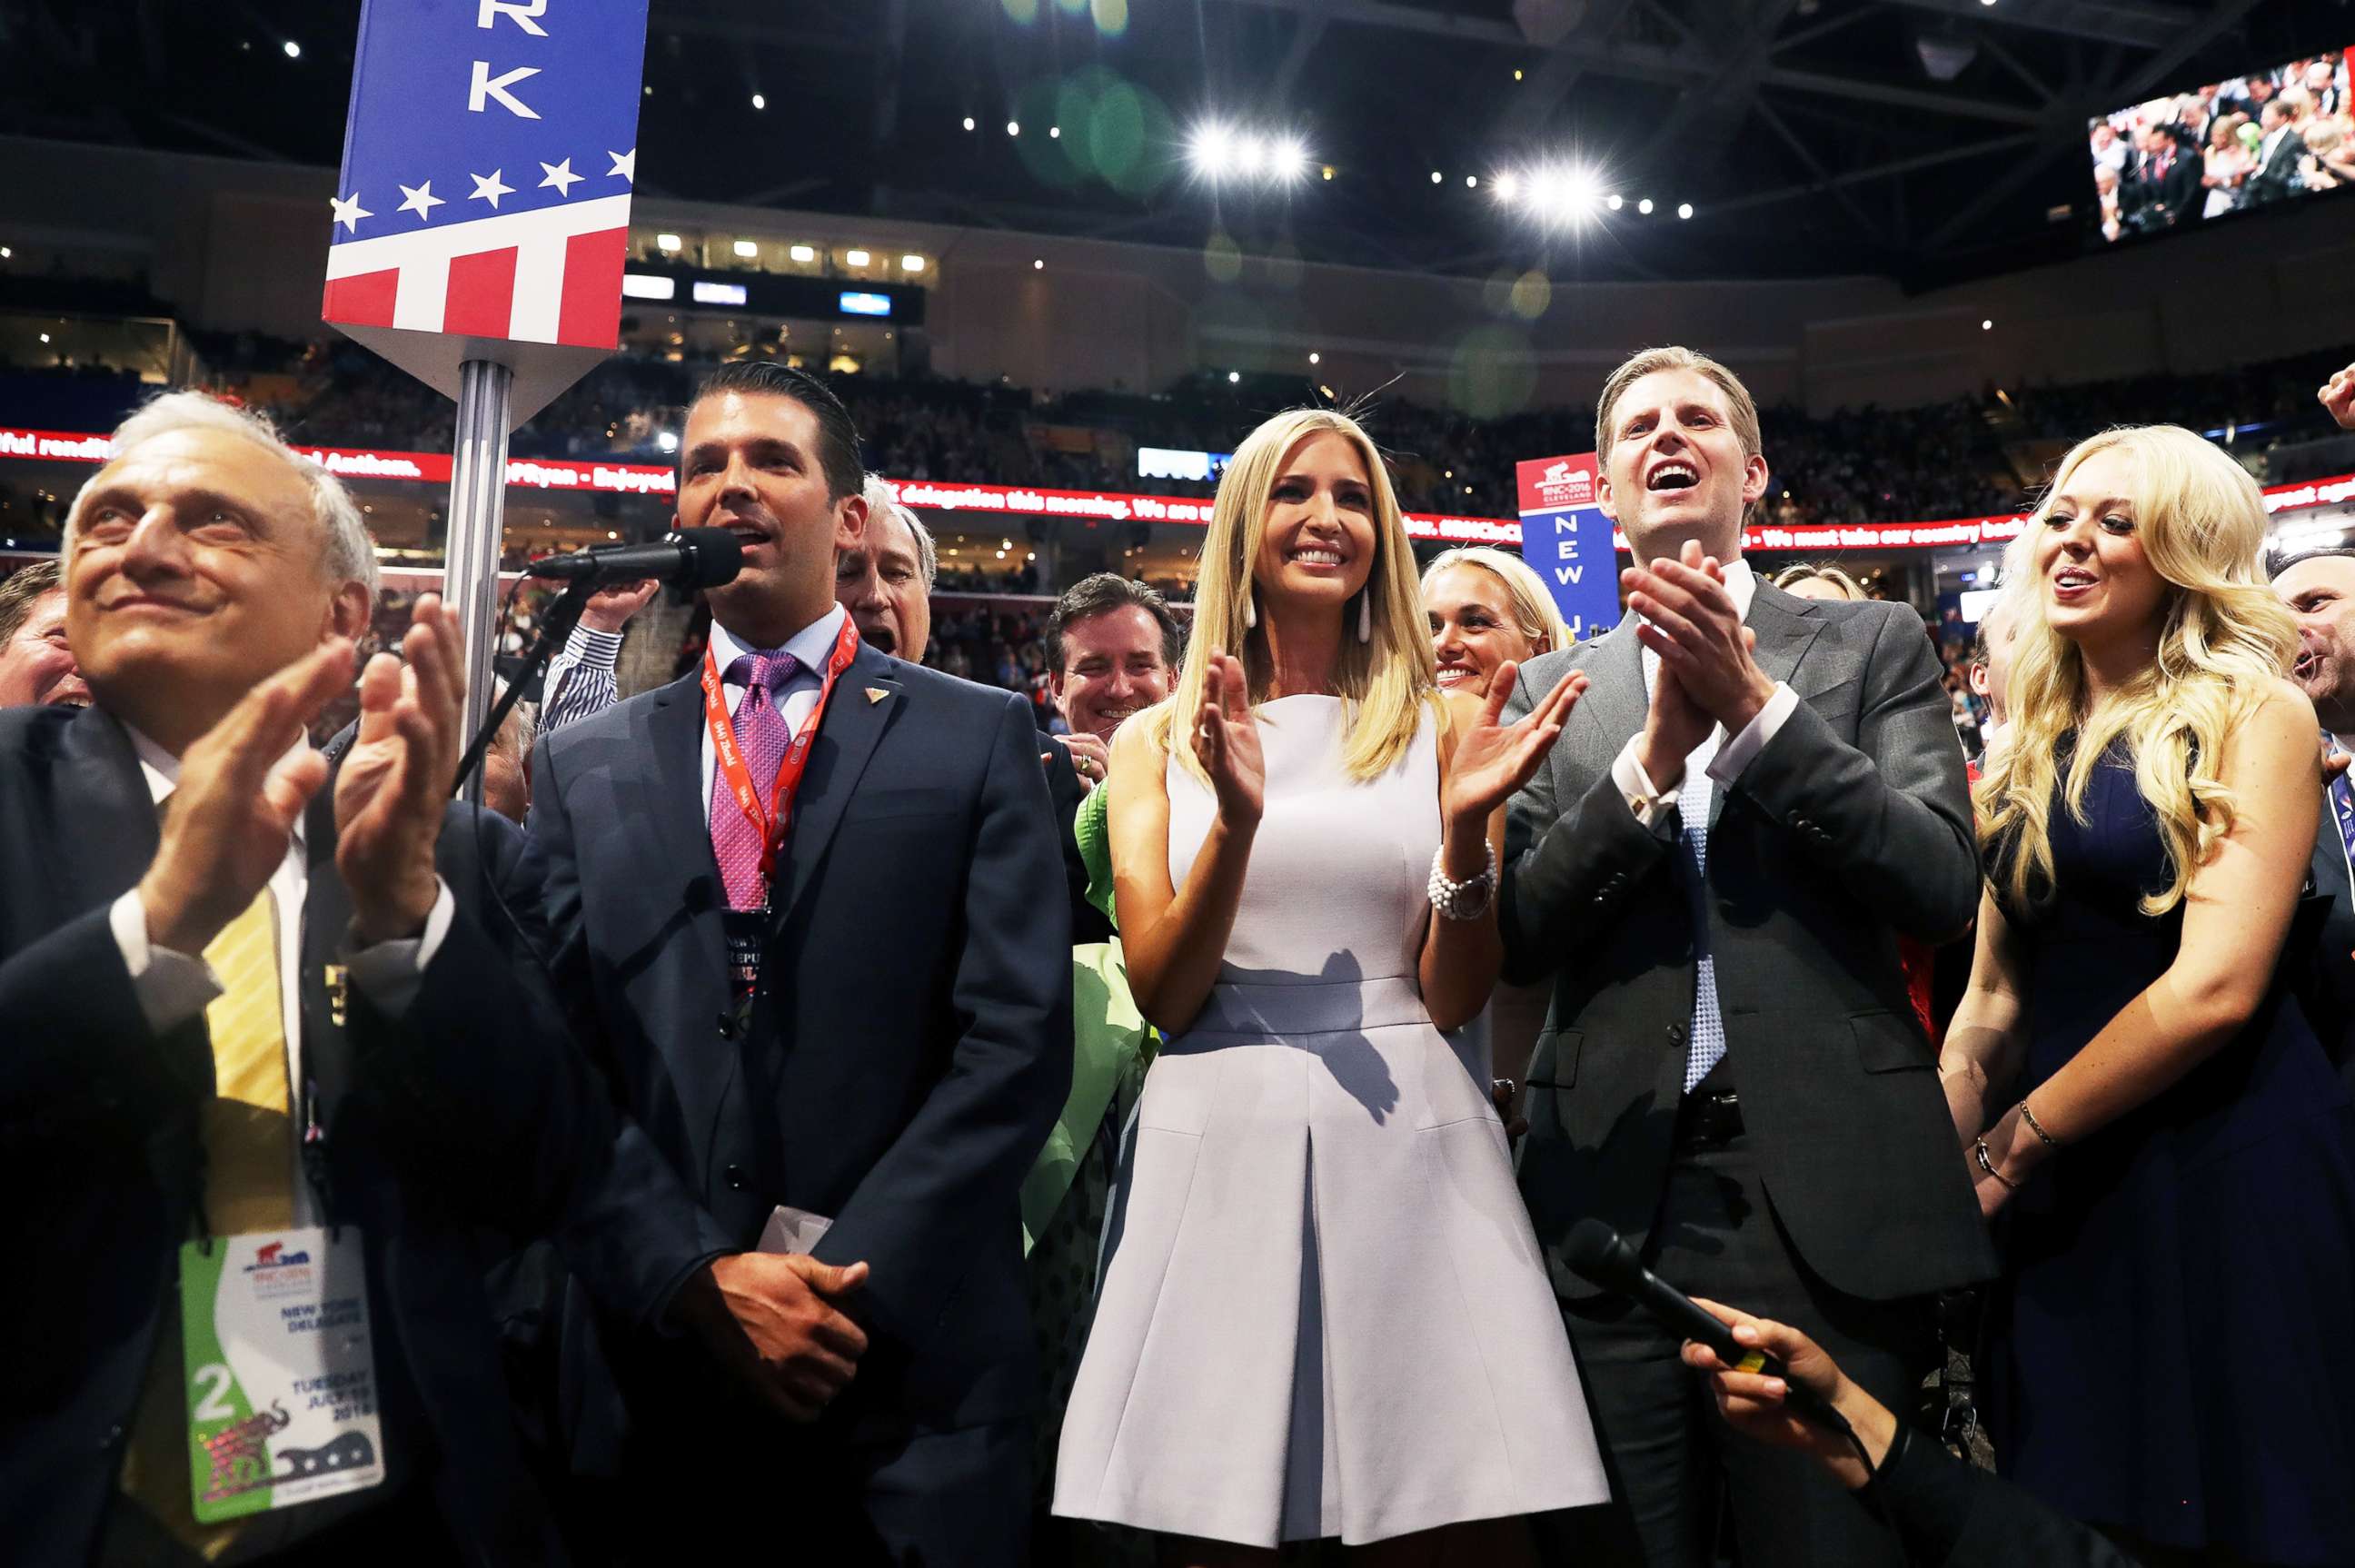 PHOTO: Donald Trump Jr., along with siblings Ivanka, Eric, and Tiffany, take part in the roll call in support of Republican presidential candidate Donald Trump on the second day of the Republican National Convention, July 19, 2016, in Cleveland.